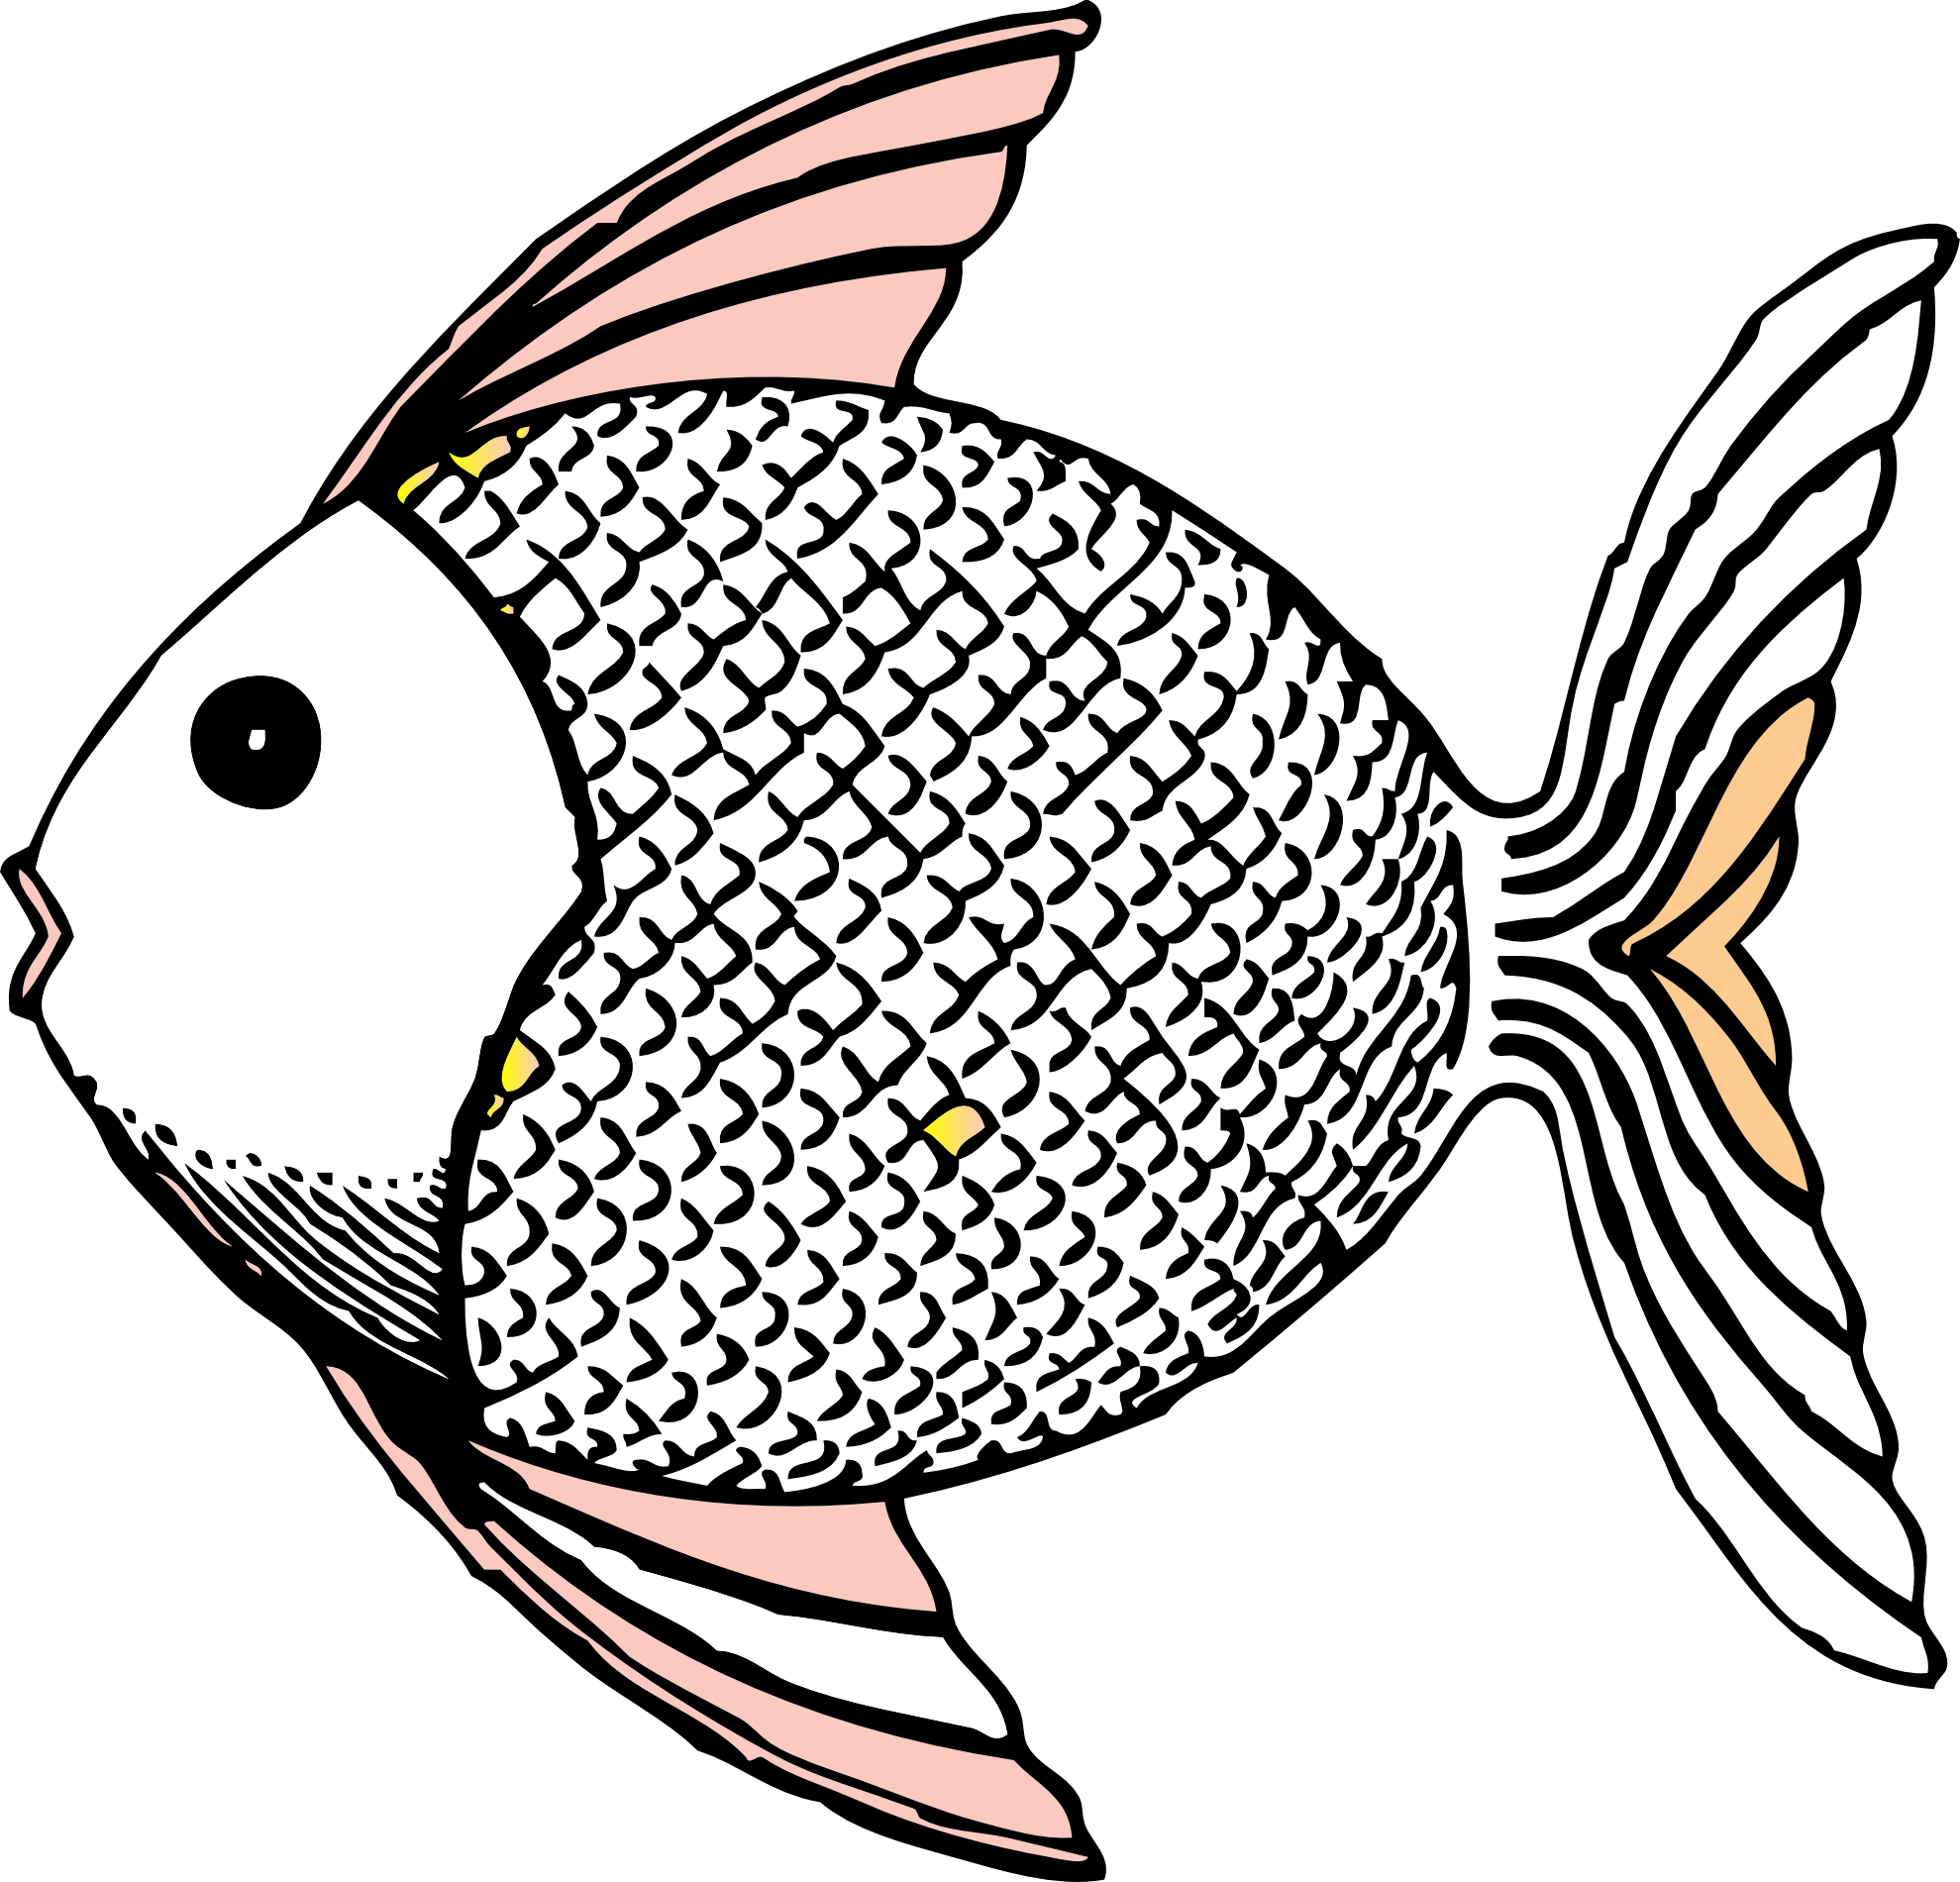 Black And White Fish Drawings - ClipArt Best